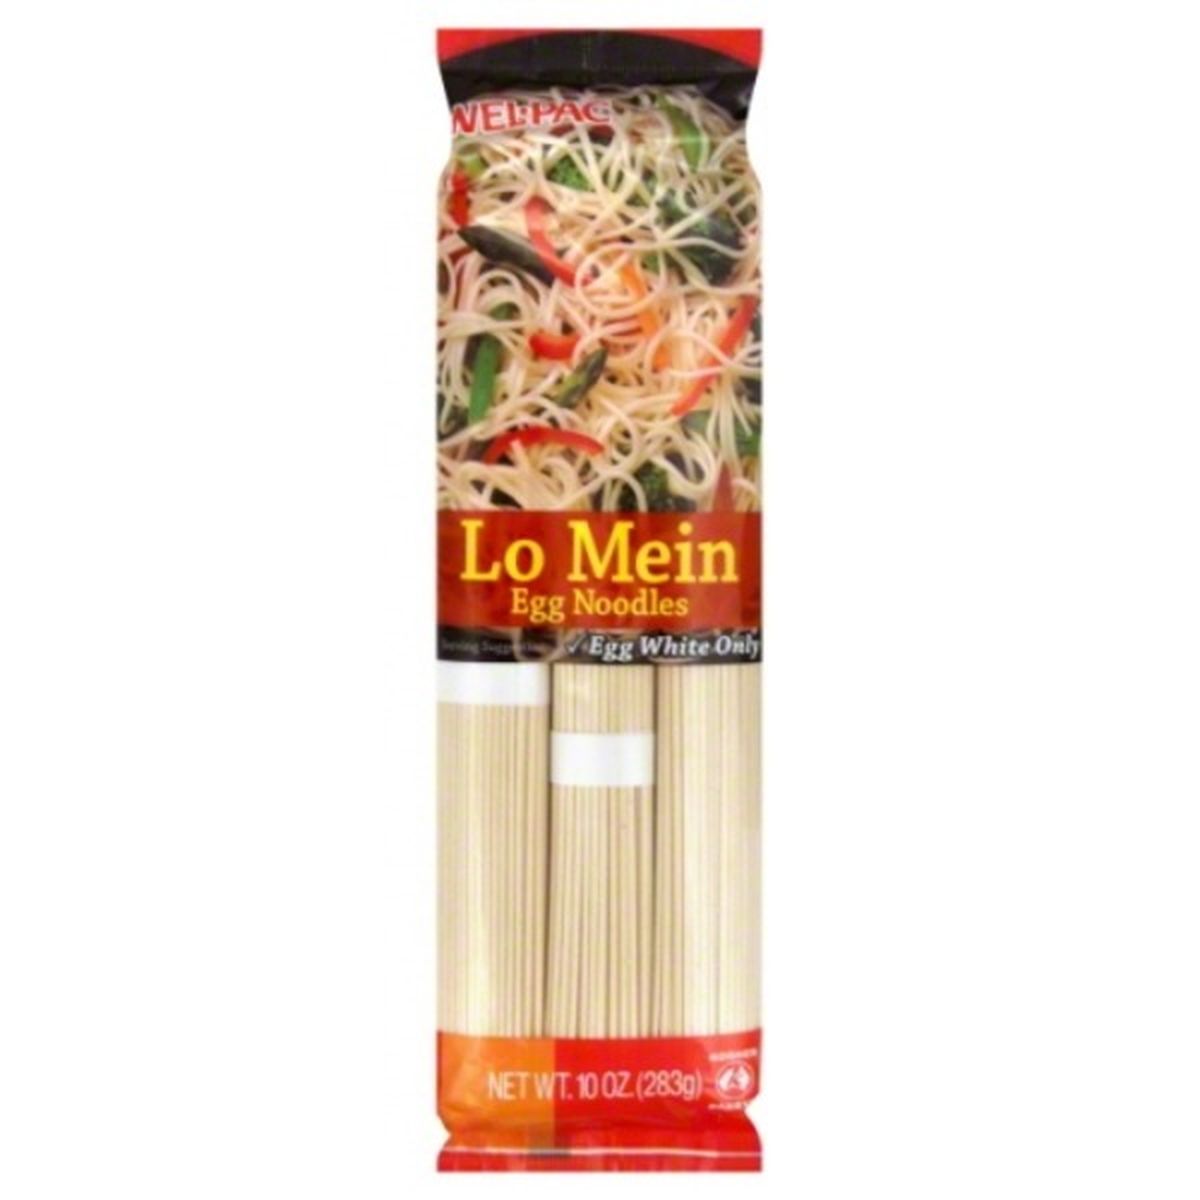 Calories in Wel-Pac Egg Noodles, Lo Mein